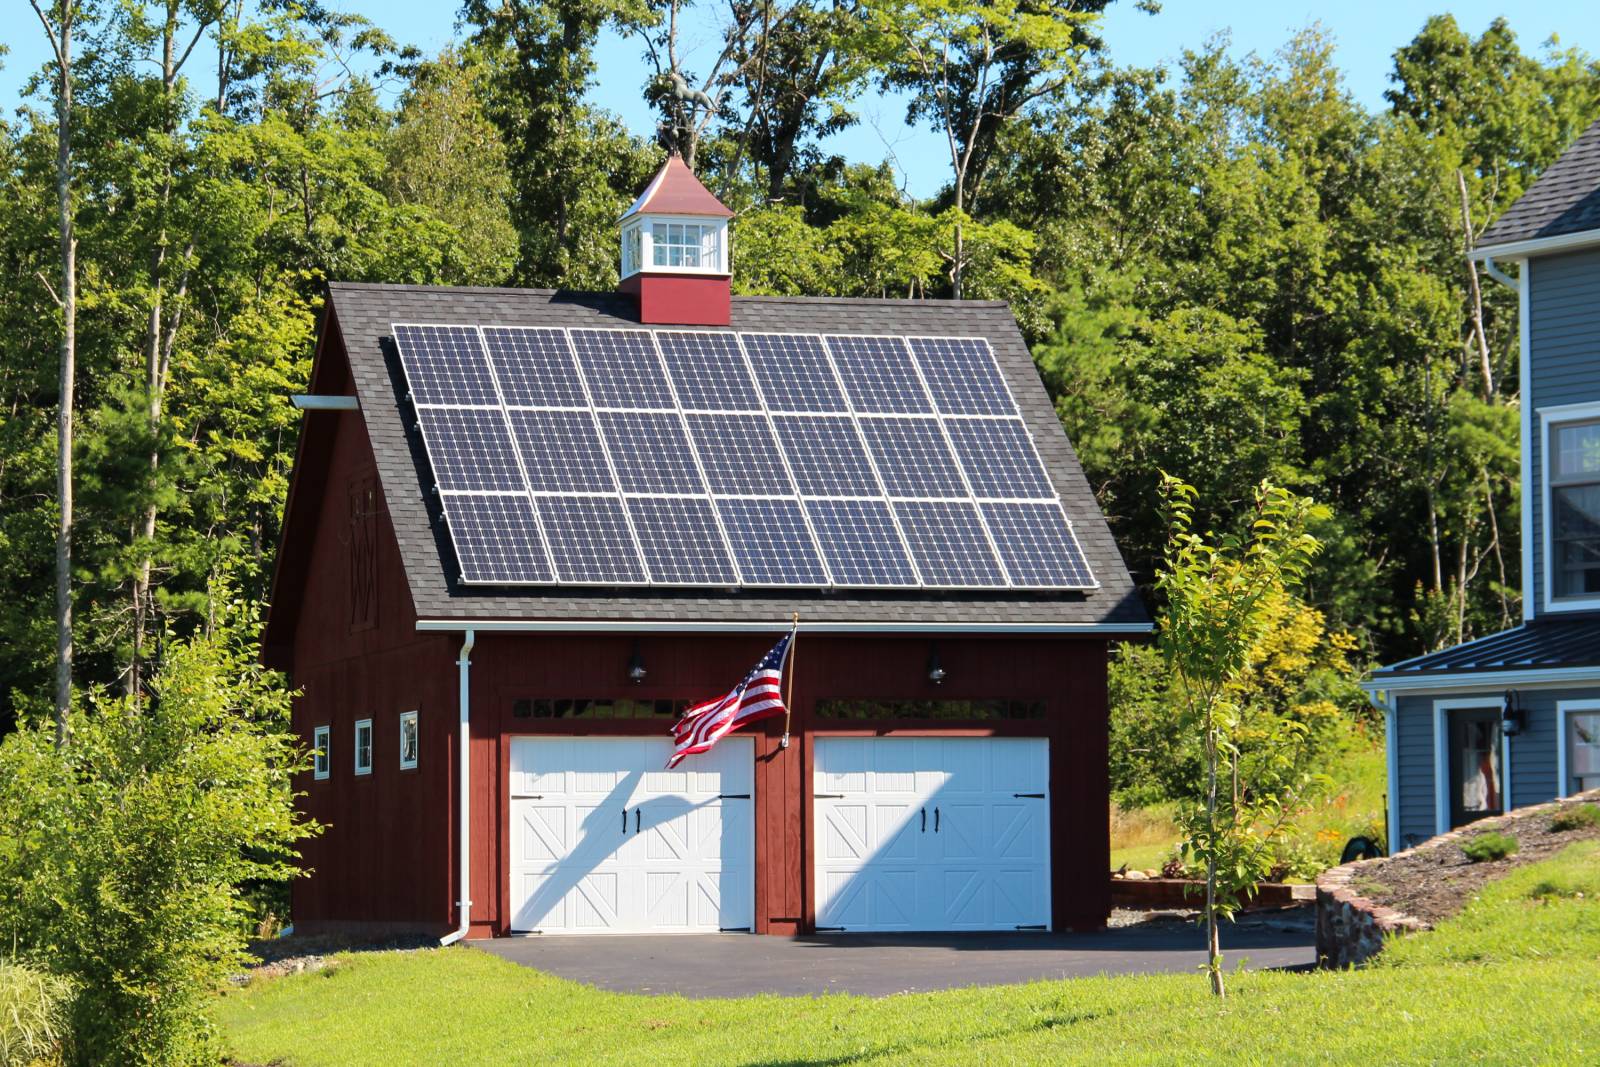 30' x 24' Newport in Monson MA with solar panels